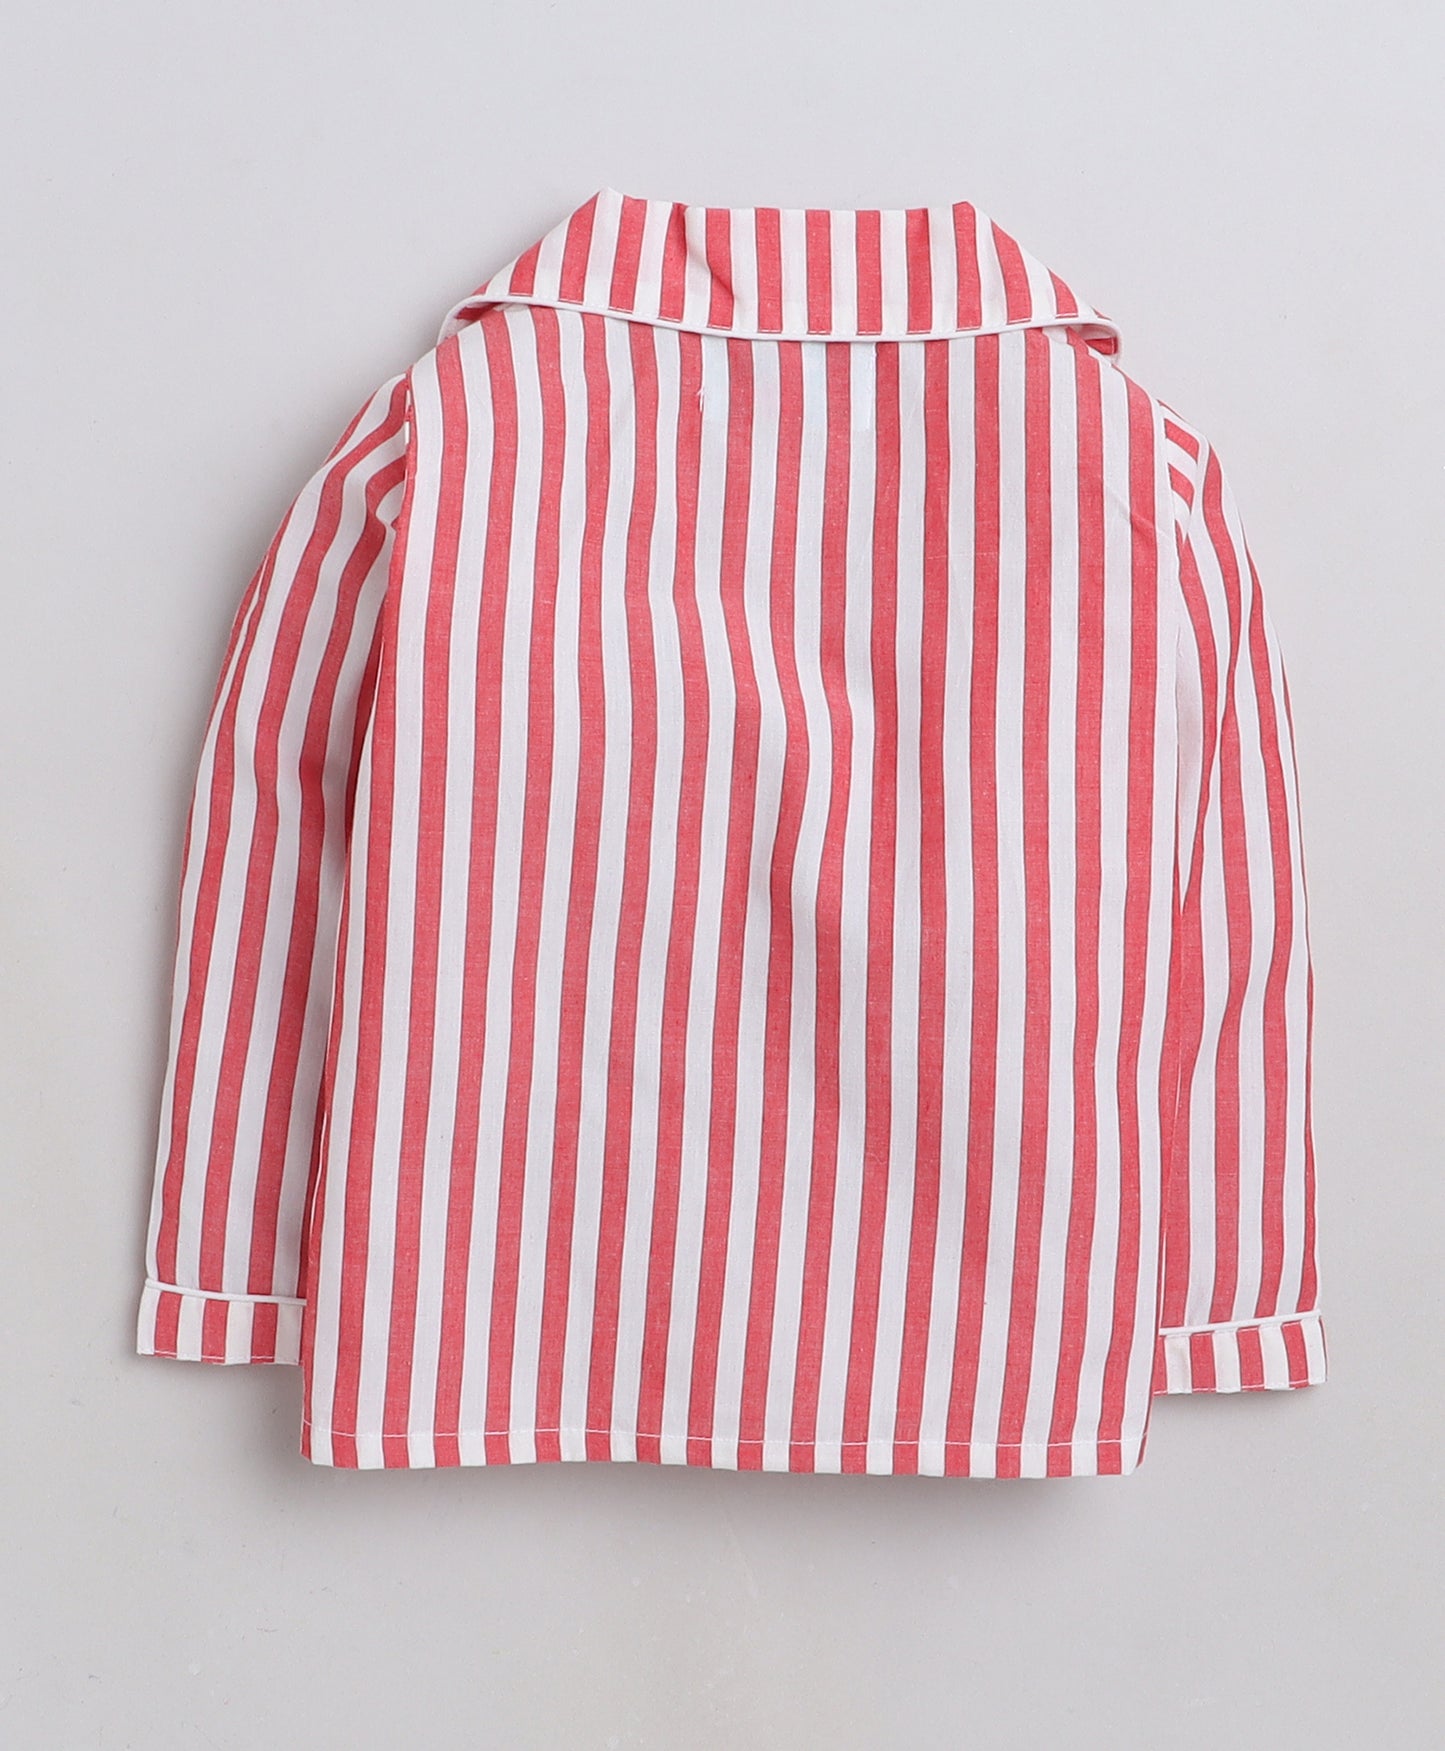 Red and White Stripes Night suit with Smart Racing Car embroidery on pocket